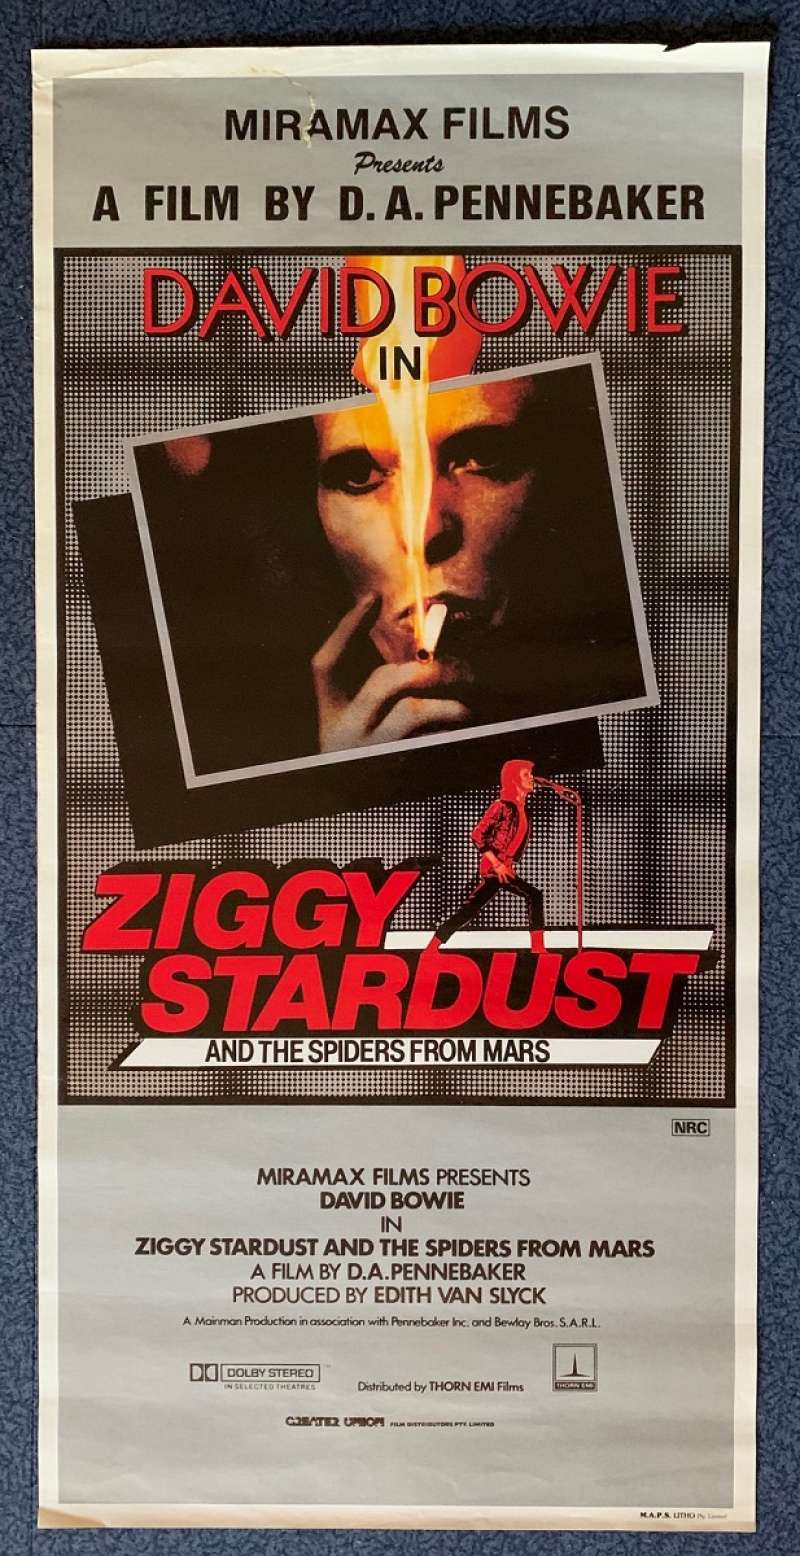 Ziggy Stardust: The Motion Picture Returning to Theaters